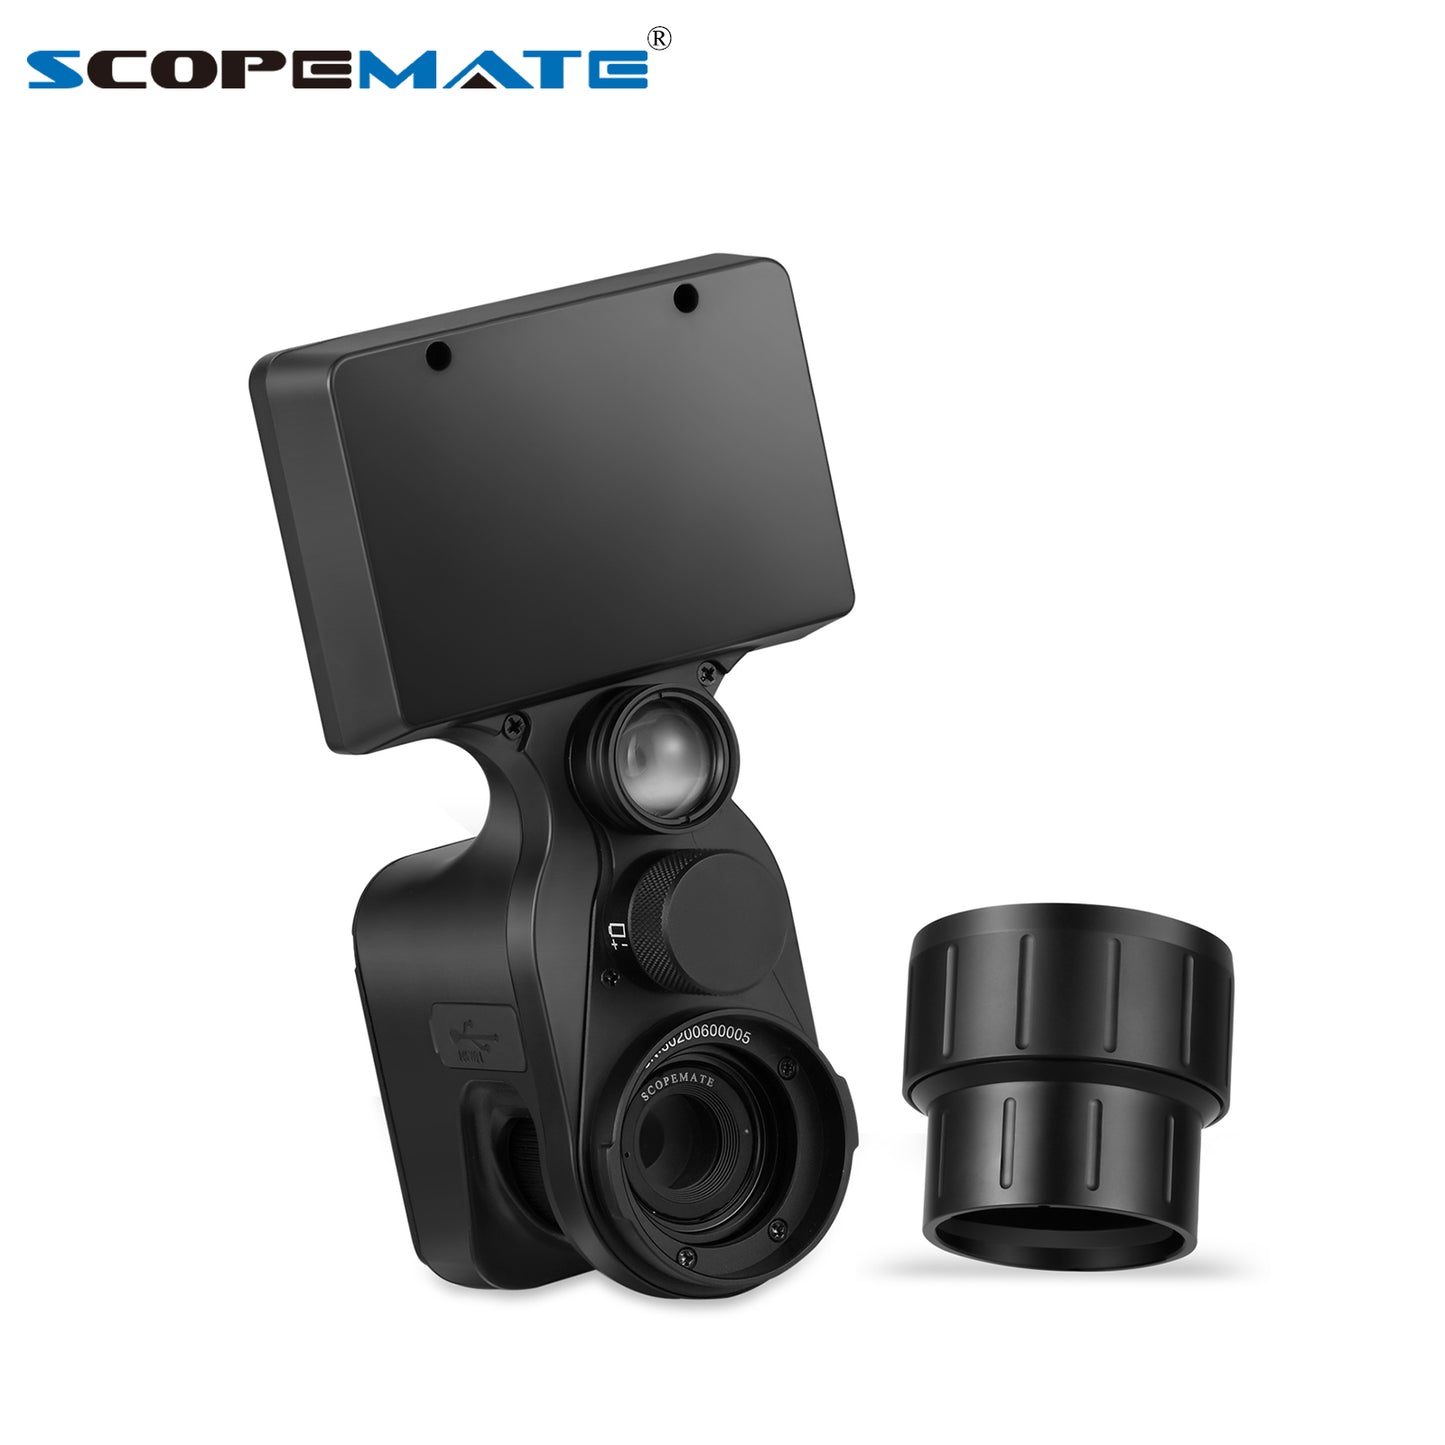 Scopemate NVS30 Night Vision Scope Camera with WiFI APP for Ratting Vermin Pest Control